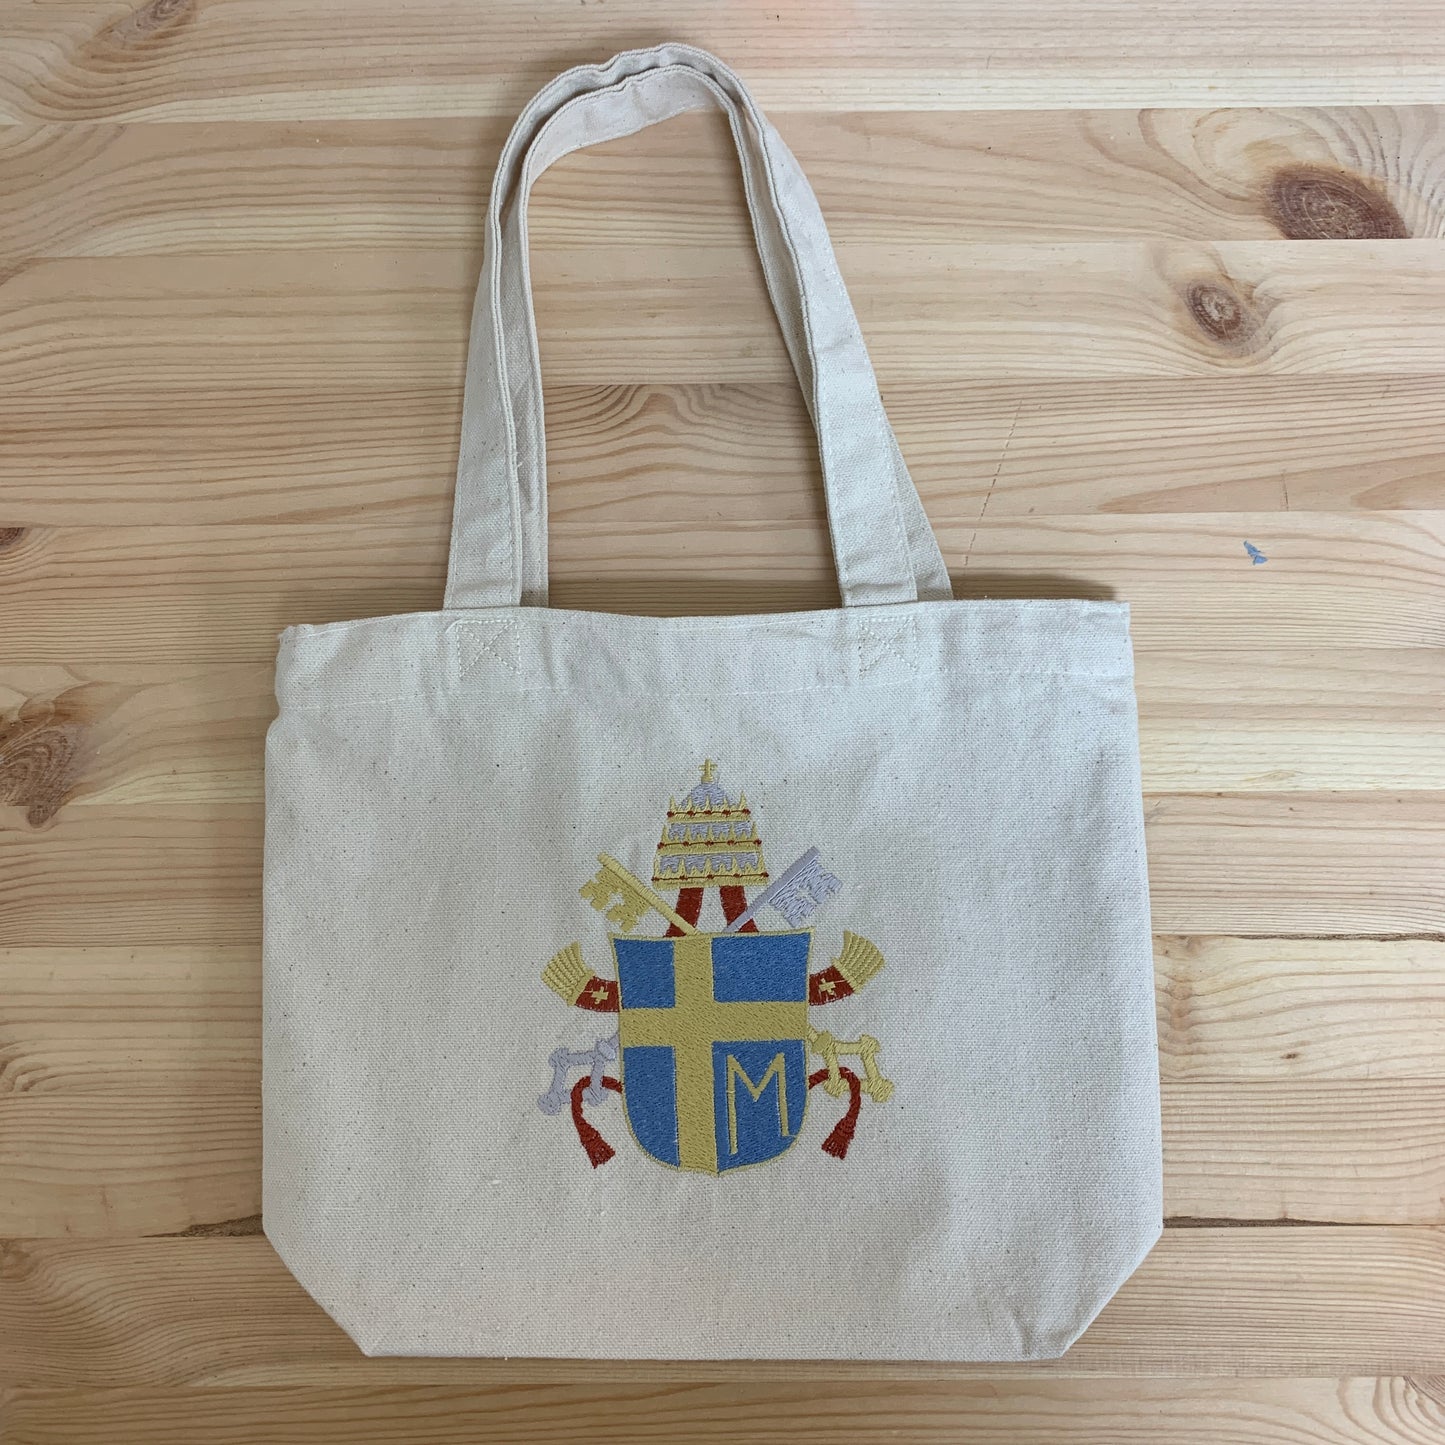 Embroidered Small Canvas Tote Bag by SCTJM